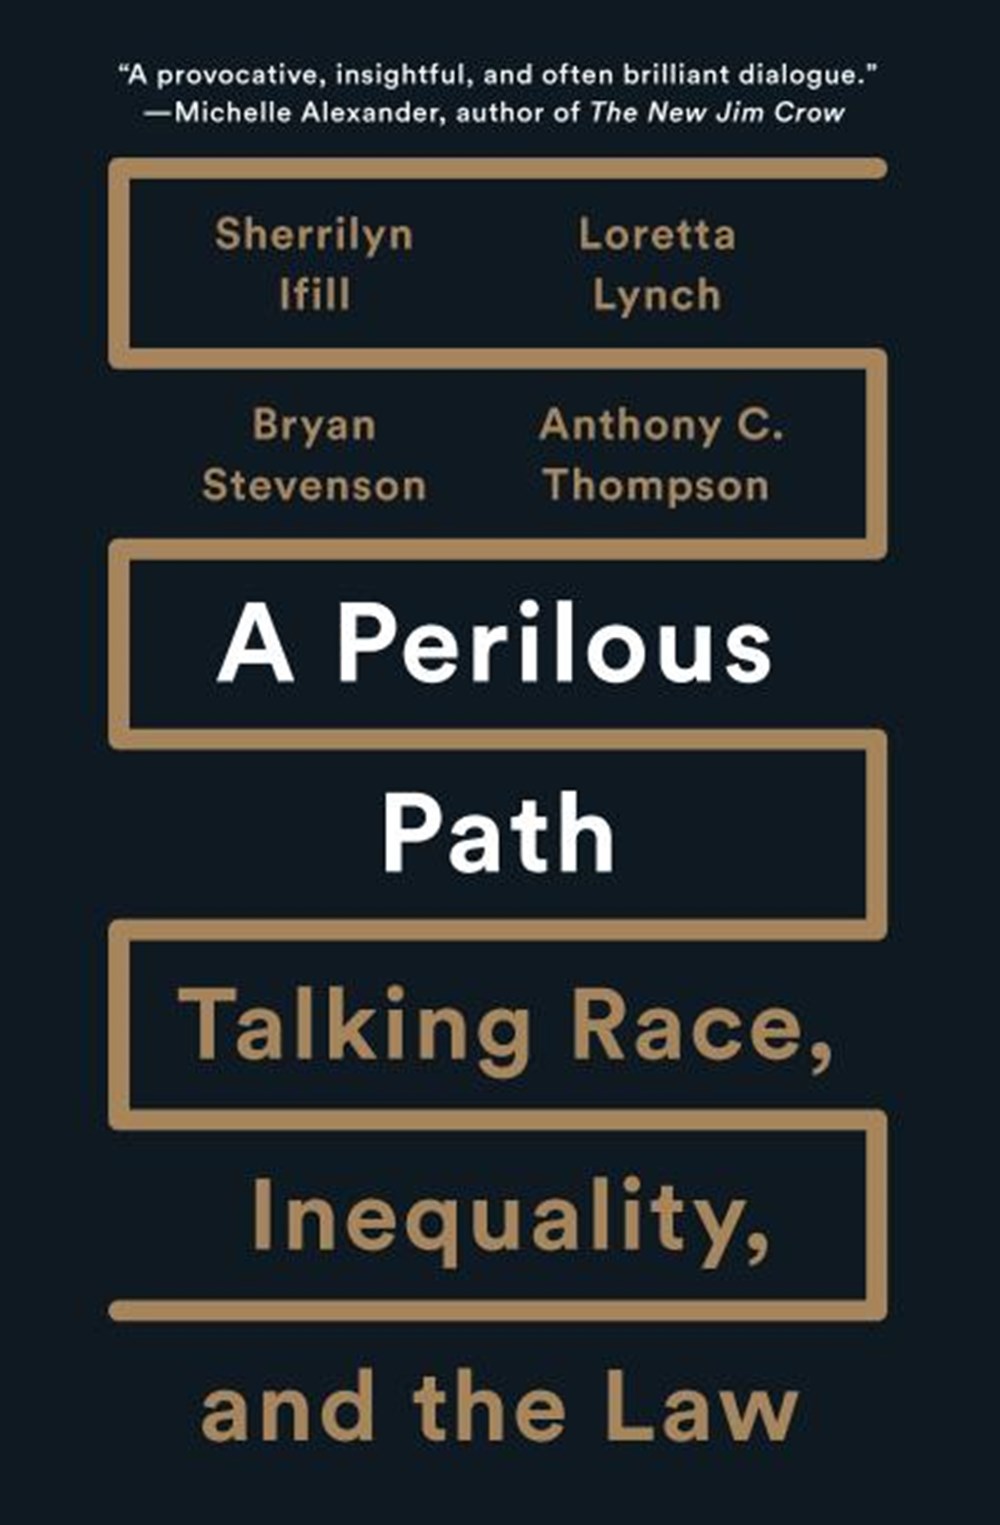 Perilous Path Talking Race, Inequality, and the Law